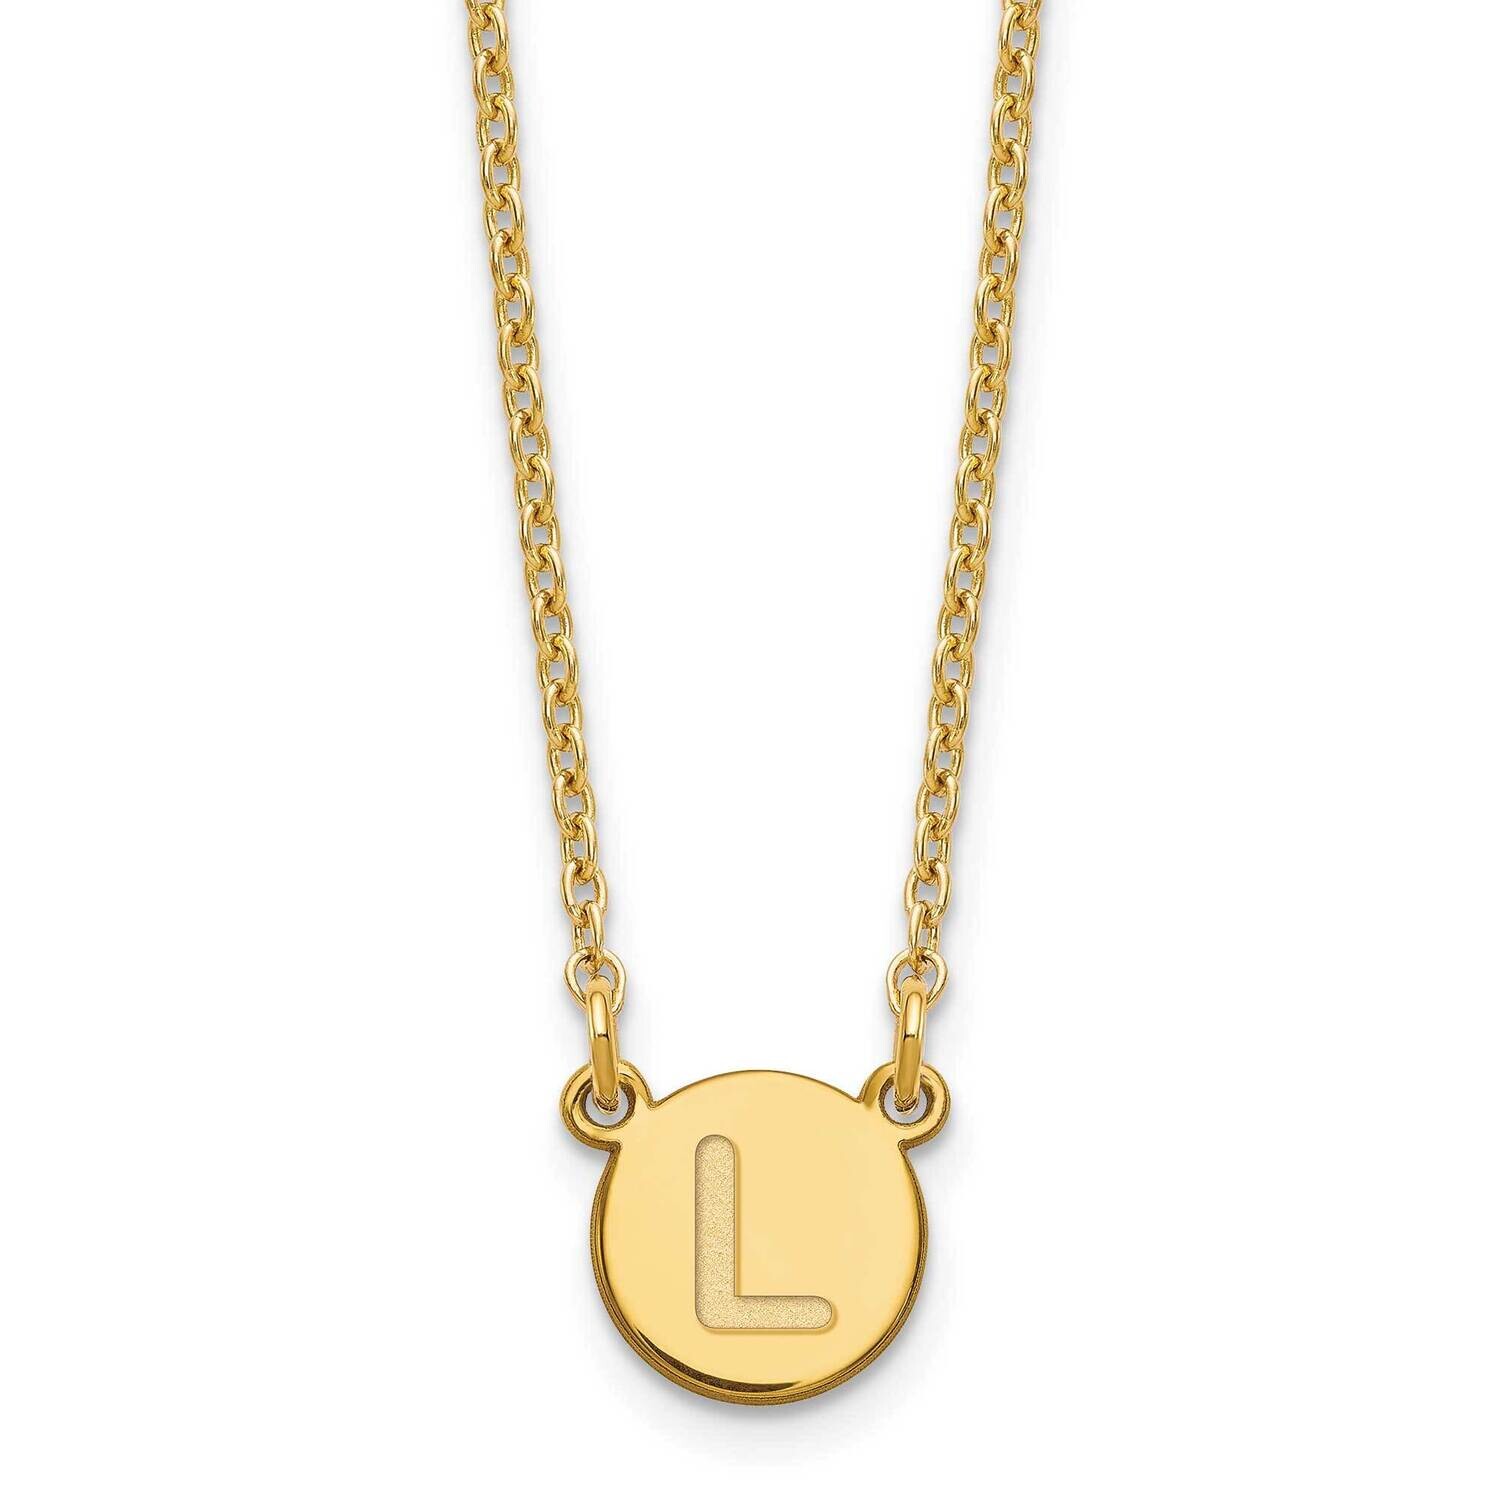 Gold-Plated Tiny Circle Block Letter L Initial Necklace Sterling Silver XNA722GP/L